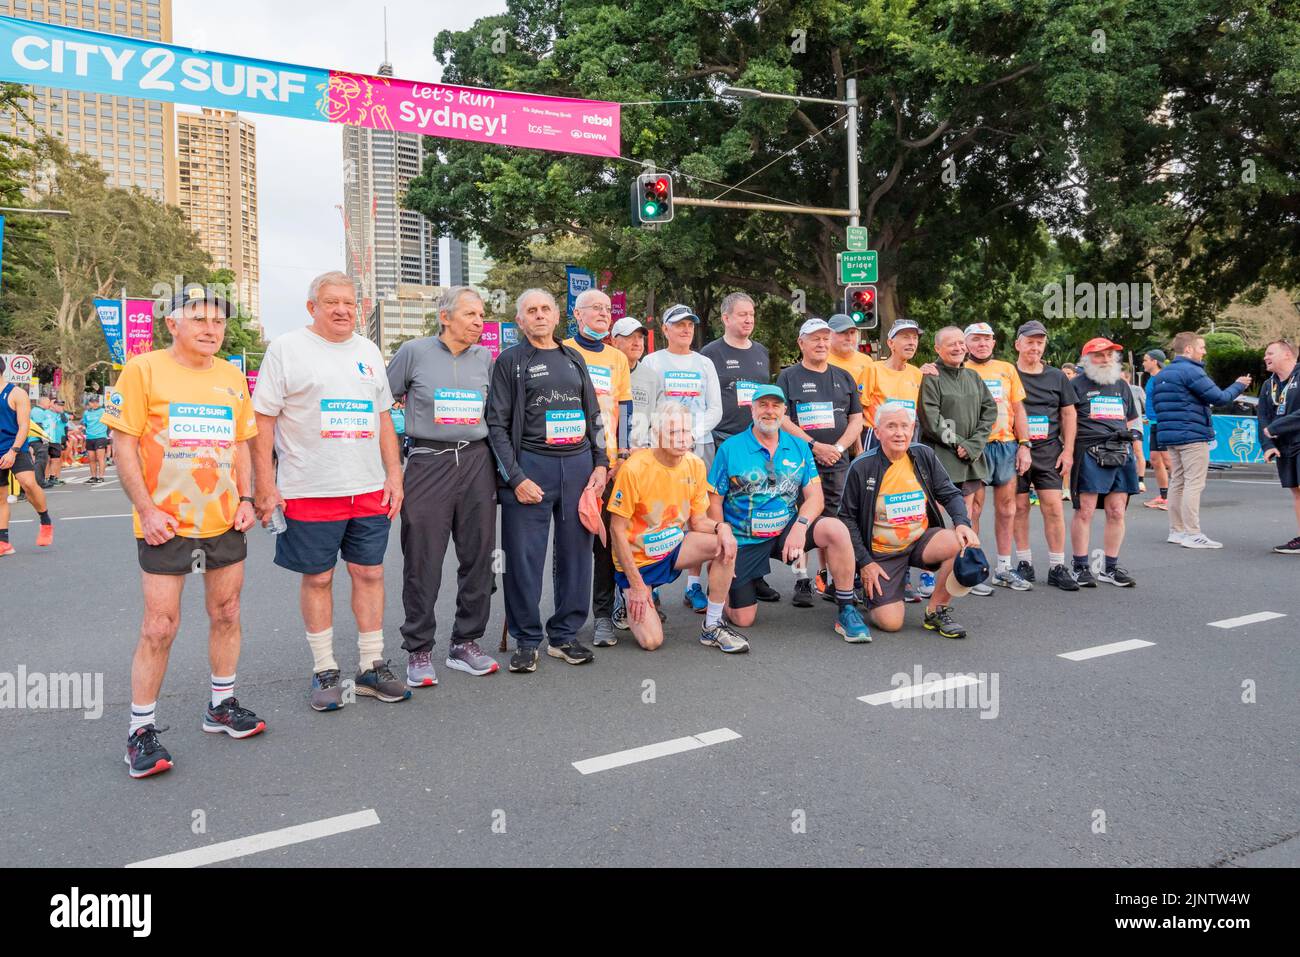 Sydney, Australia.14 August 2022: Some 60,000+ people are taking part in the 50th City2Surf race in Sydney, the first since 2019 after cancellations in 2020 and 2021 due to Covid-19 restrictions. The fourteen-kilometre race, the largest of its kind in the world, leads runners from Hyde Park out of the city, up and over heart break hill and on to Bondi Beach. Pictured: “The Legends” runners who have taken part in every event since the start in 1971 Credit: Stephen Dwyer / Alamy Live News Stock Photo